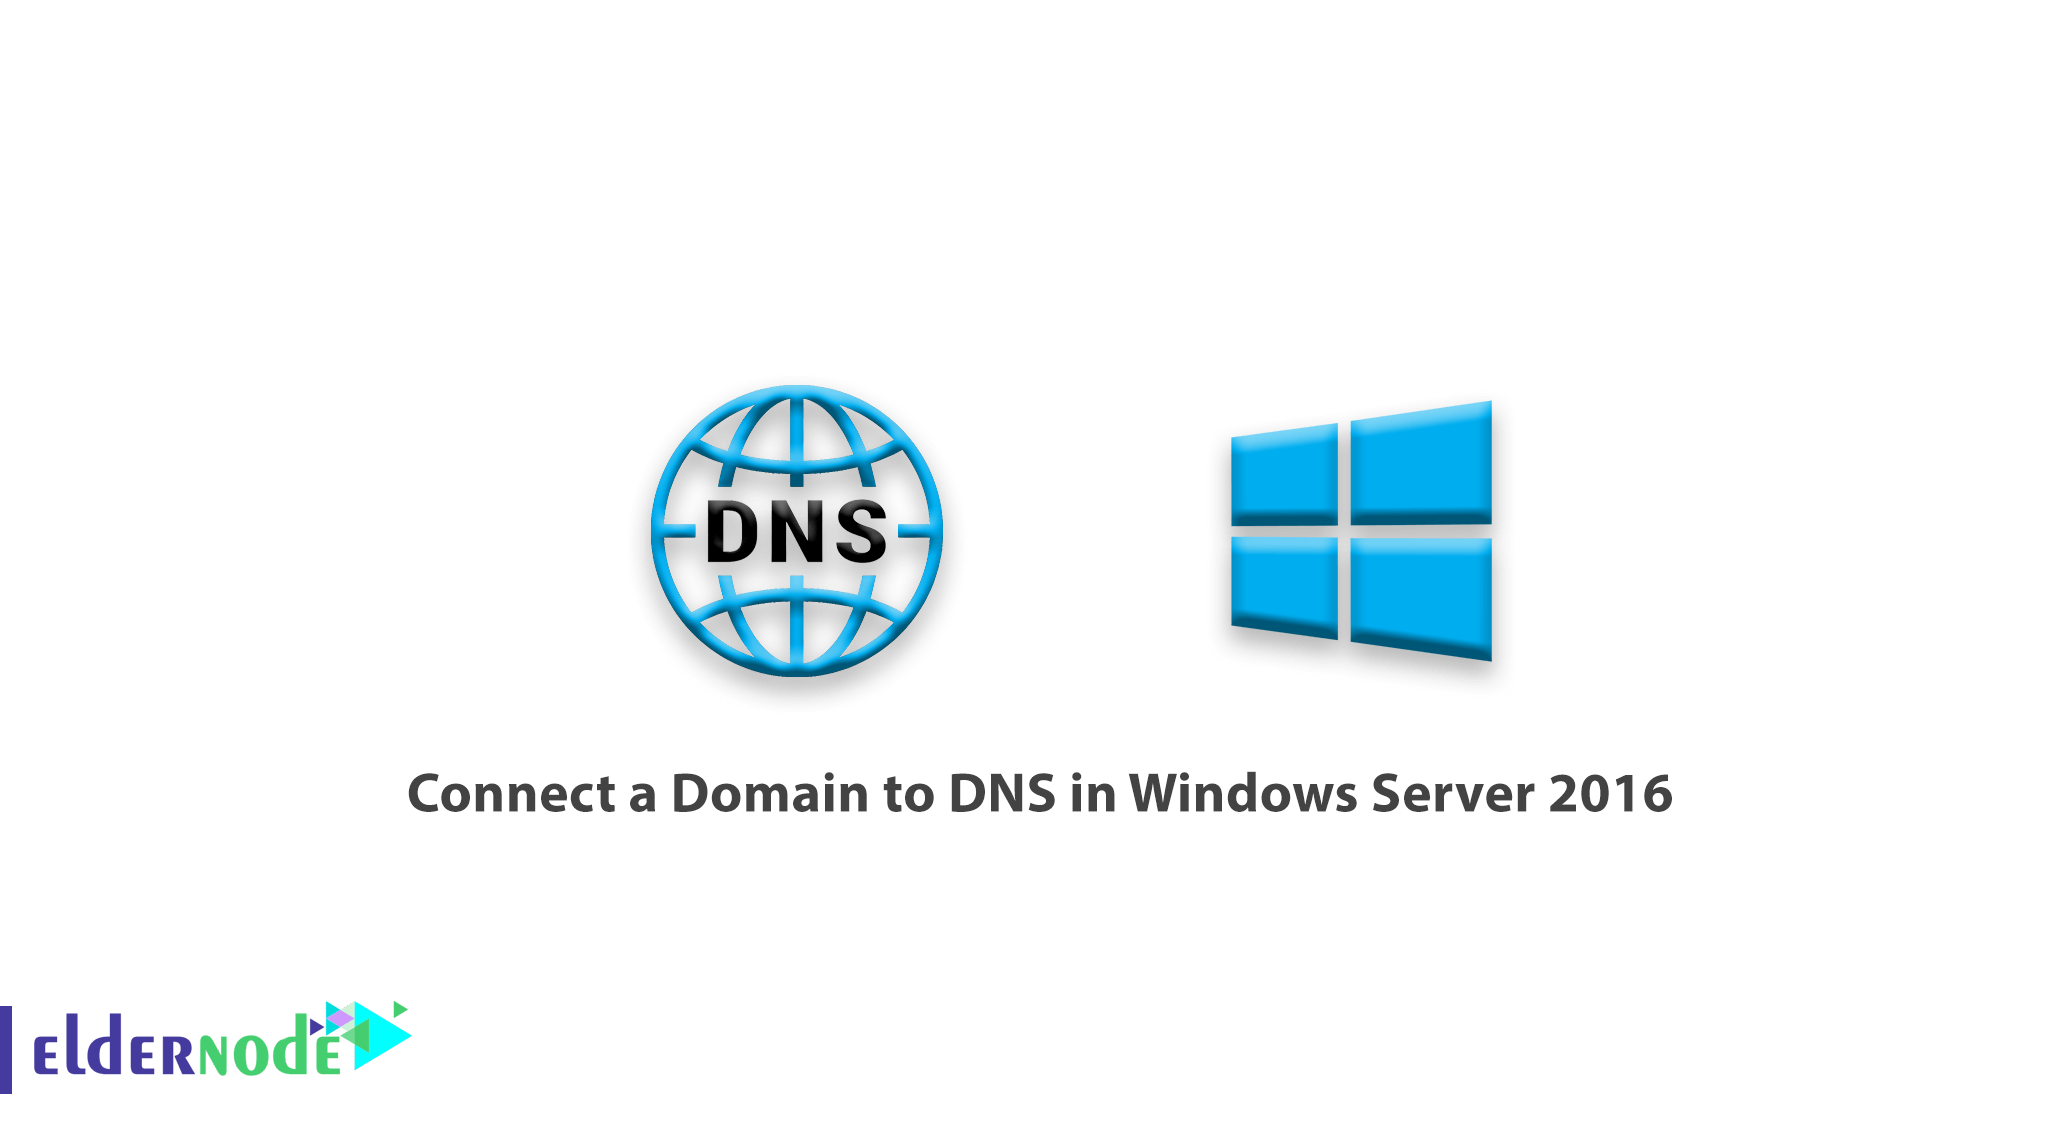 How to Connect a Domain to DNS in Windows Server 2016